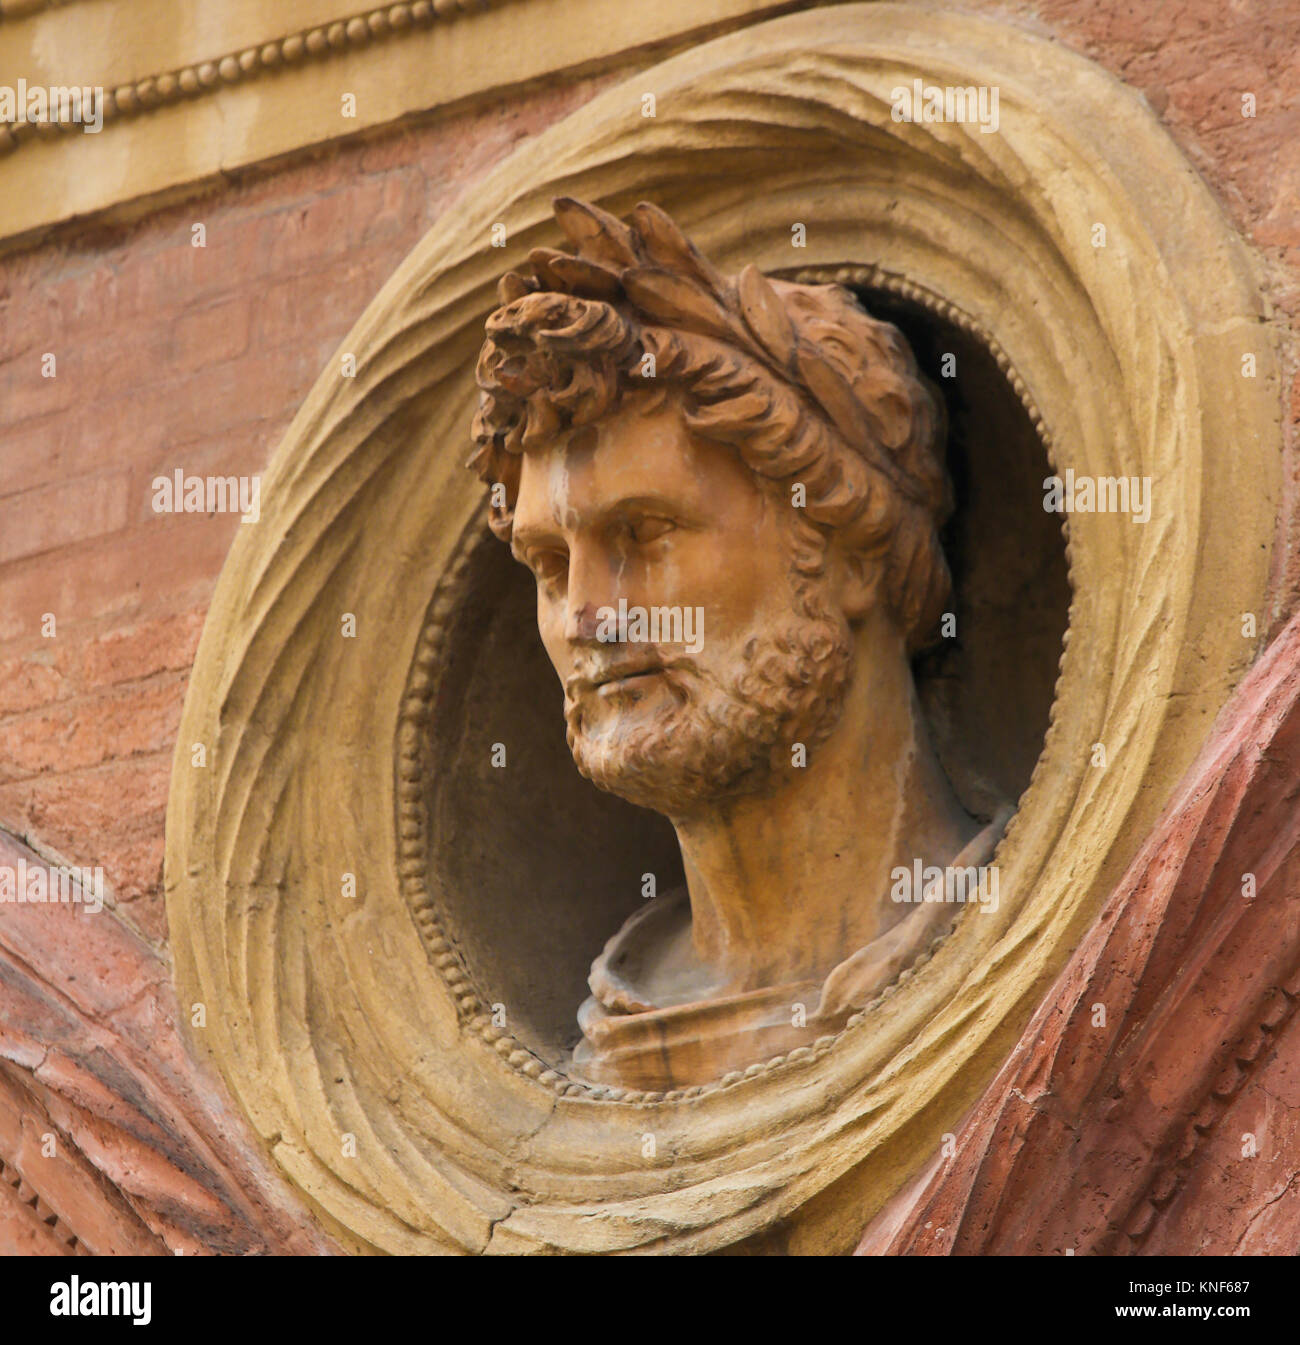 Bust of a Roman Emperor with a laurel crown at the Palazzo Bolognini Amorini Salina, a Renaissance architecture palace located on Piazza Santo Stefano Stock Photo